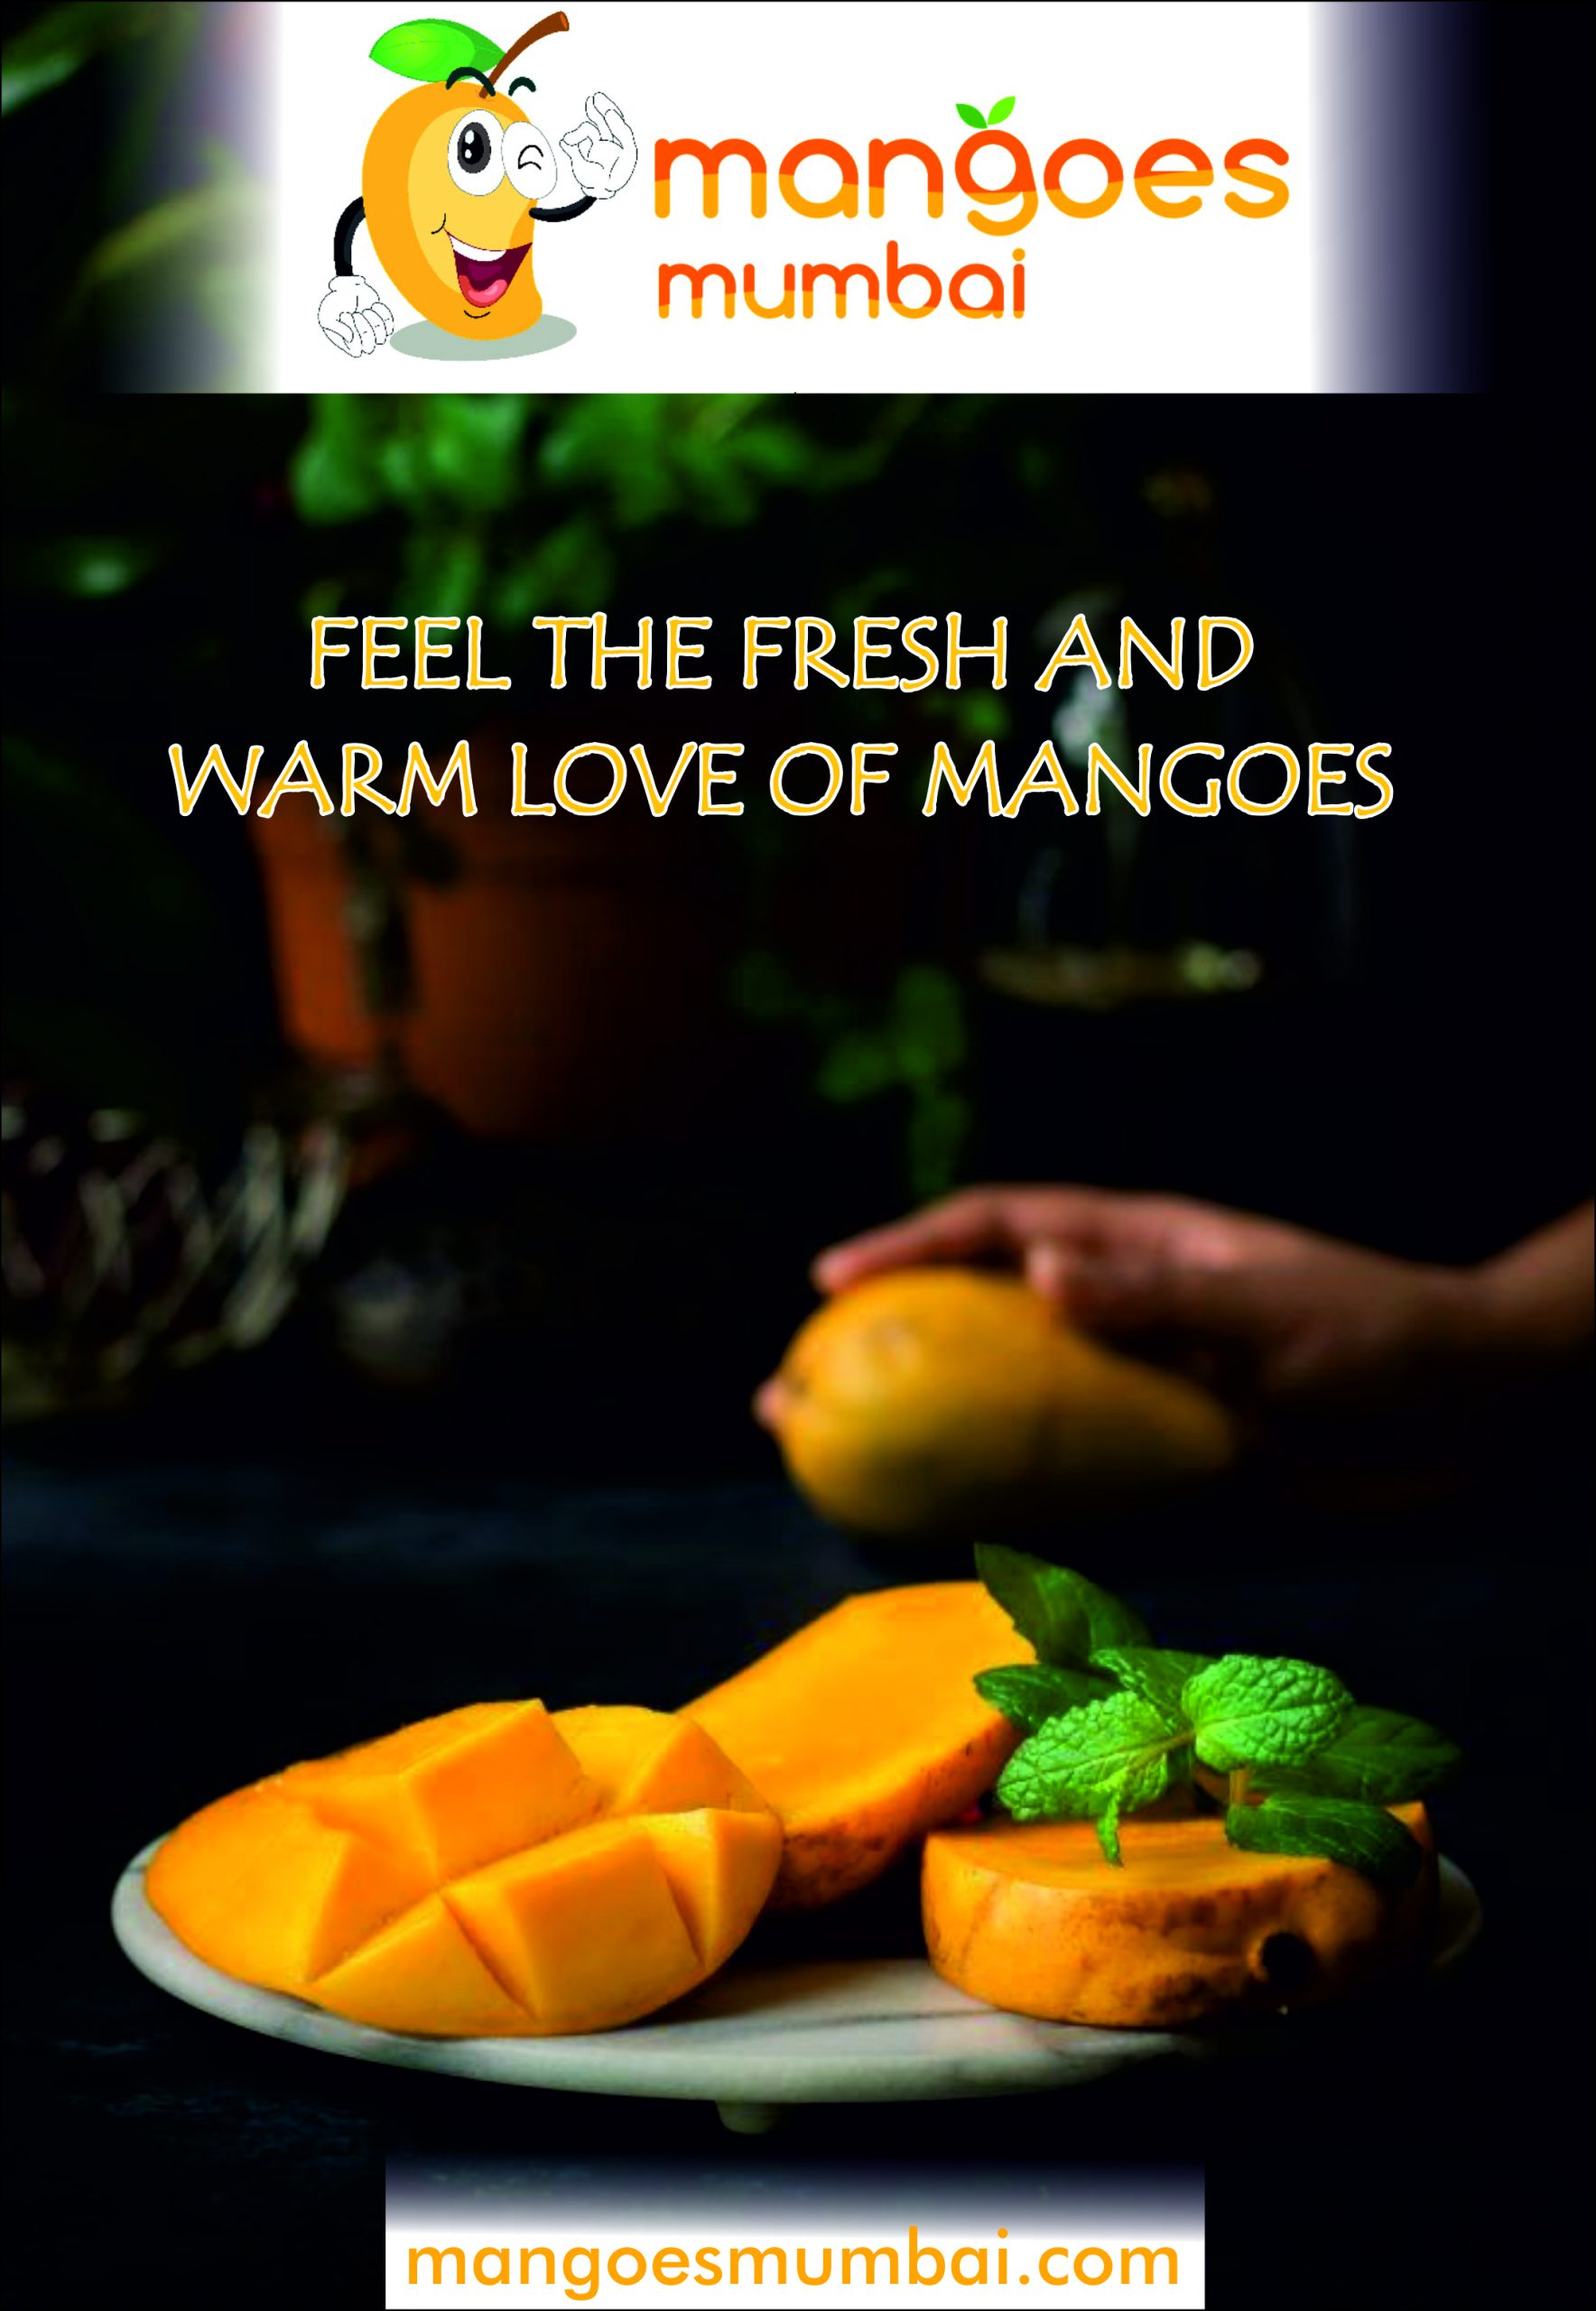 The Season Of Mangoes Has Arrived